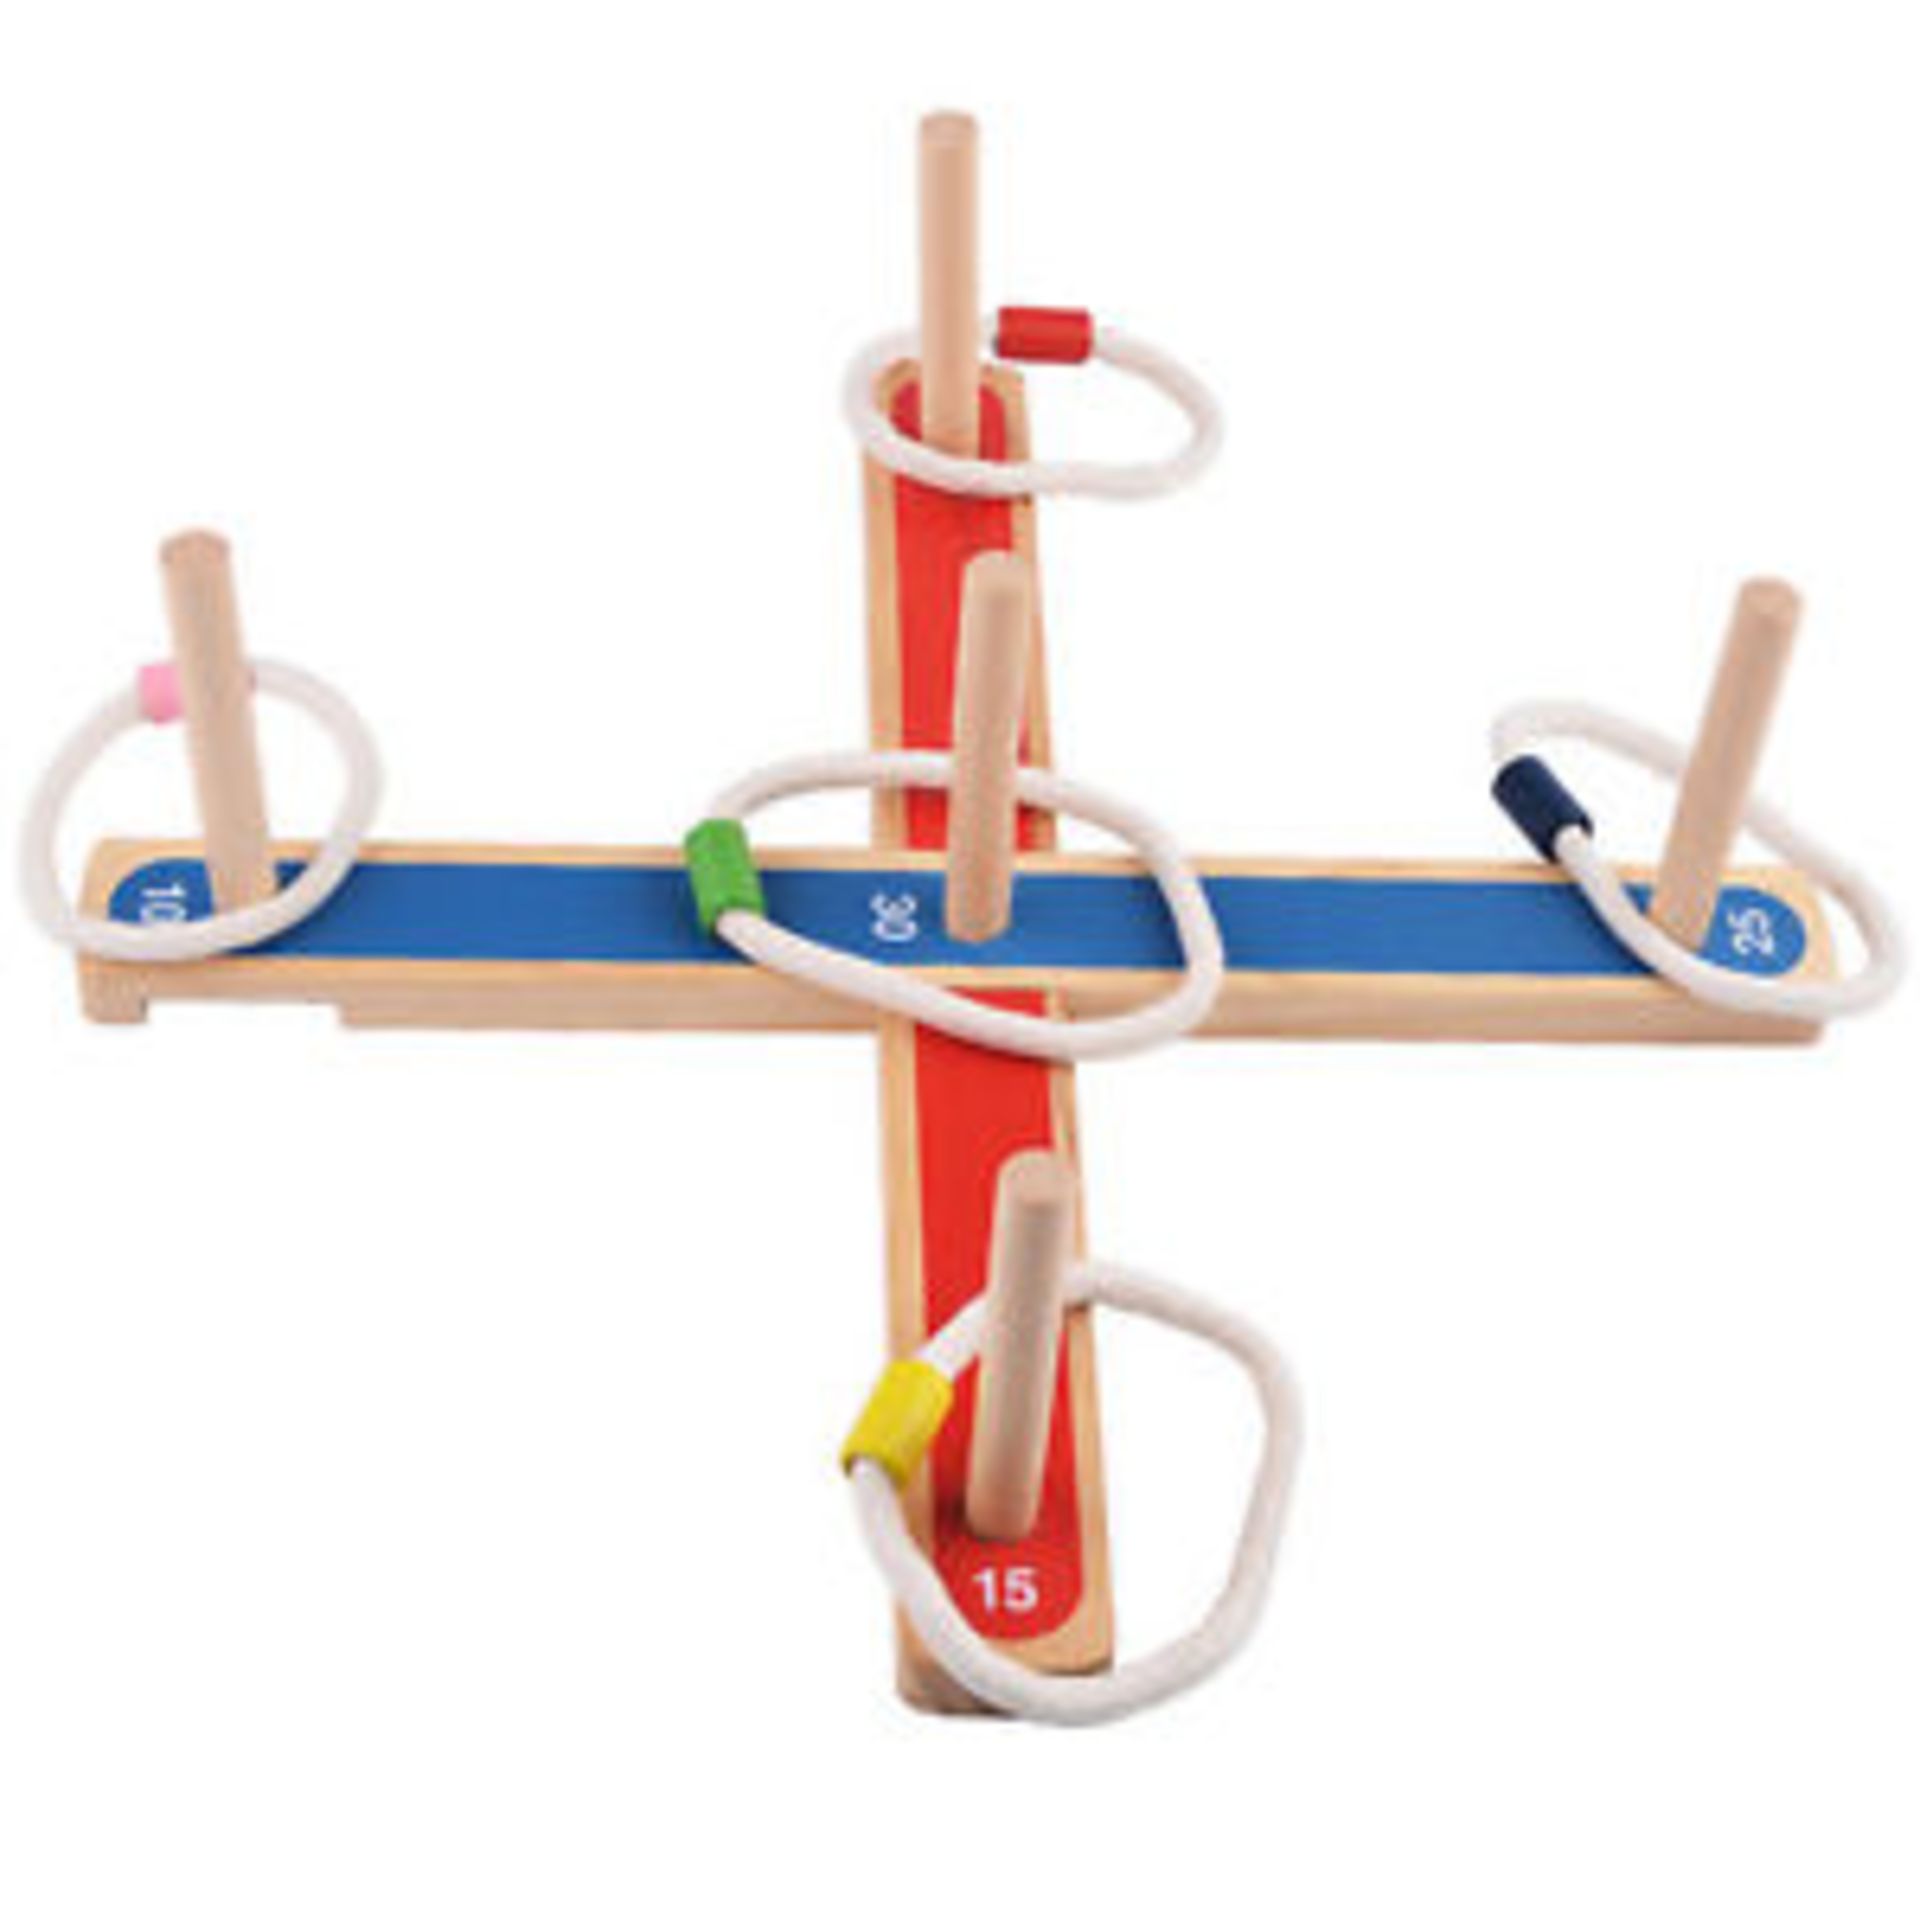 V *TRADE QTY* Brand New Wooden Ring Toss Set (Image is Similar) X 5 YOUR BID PRICE TO BE